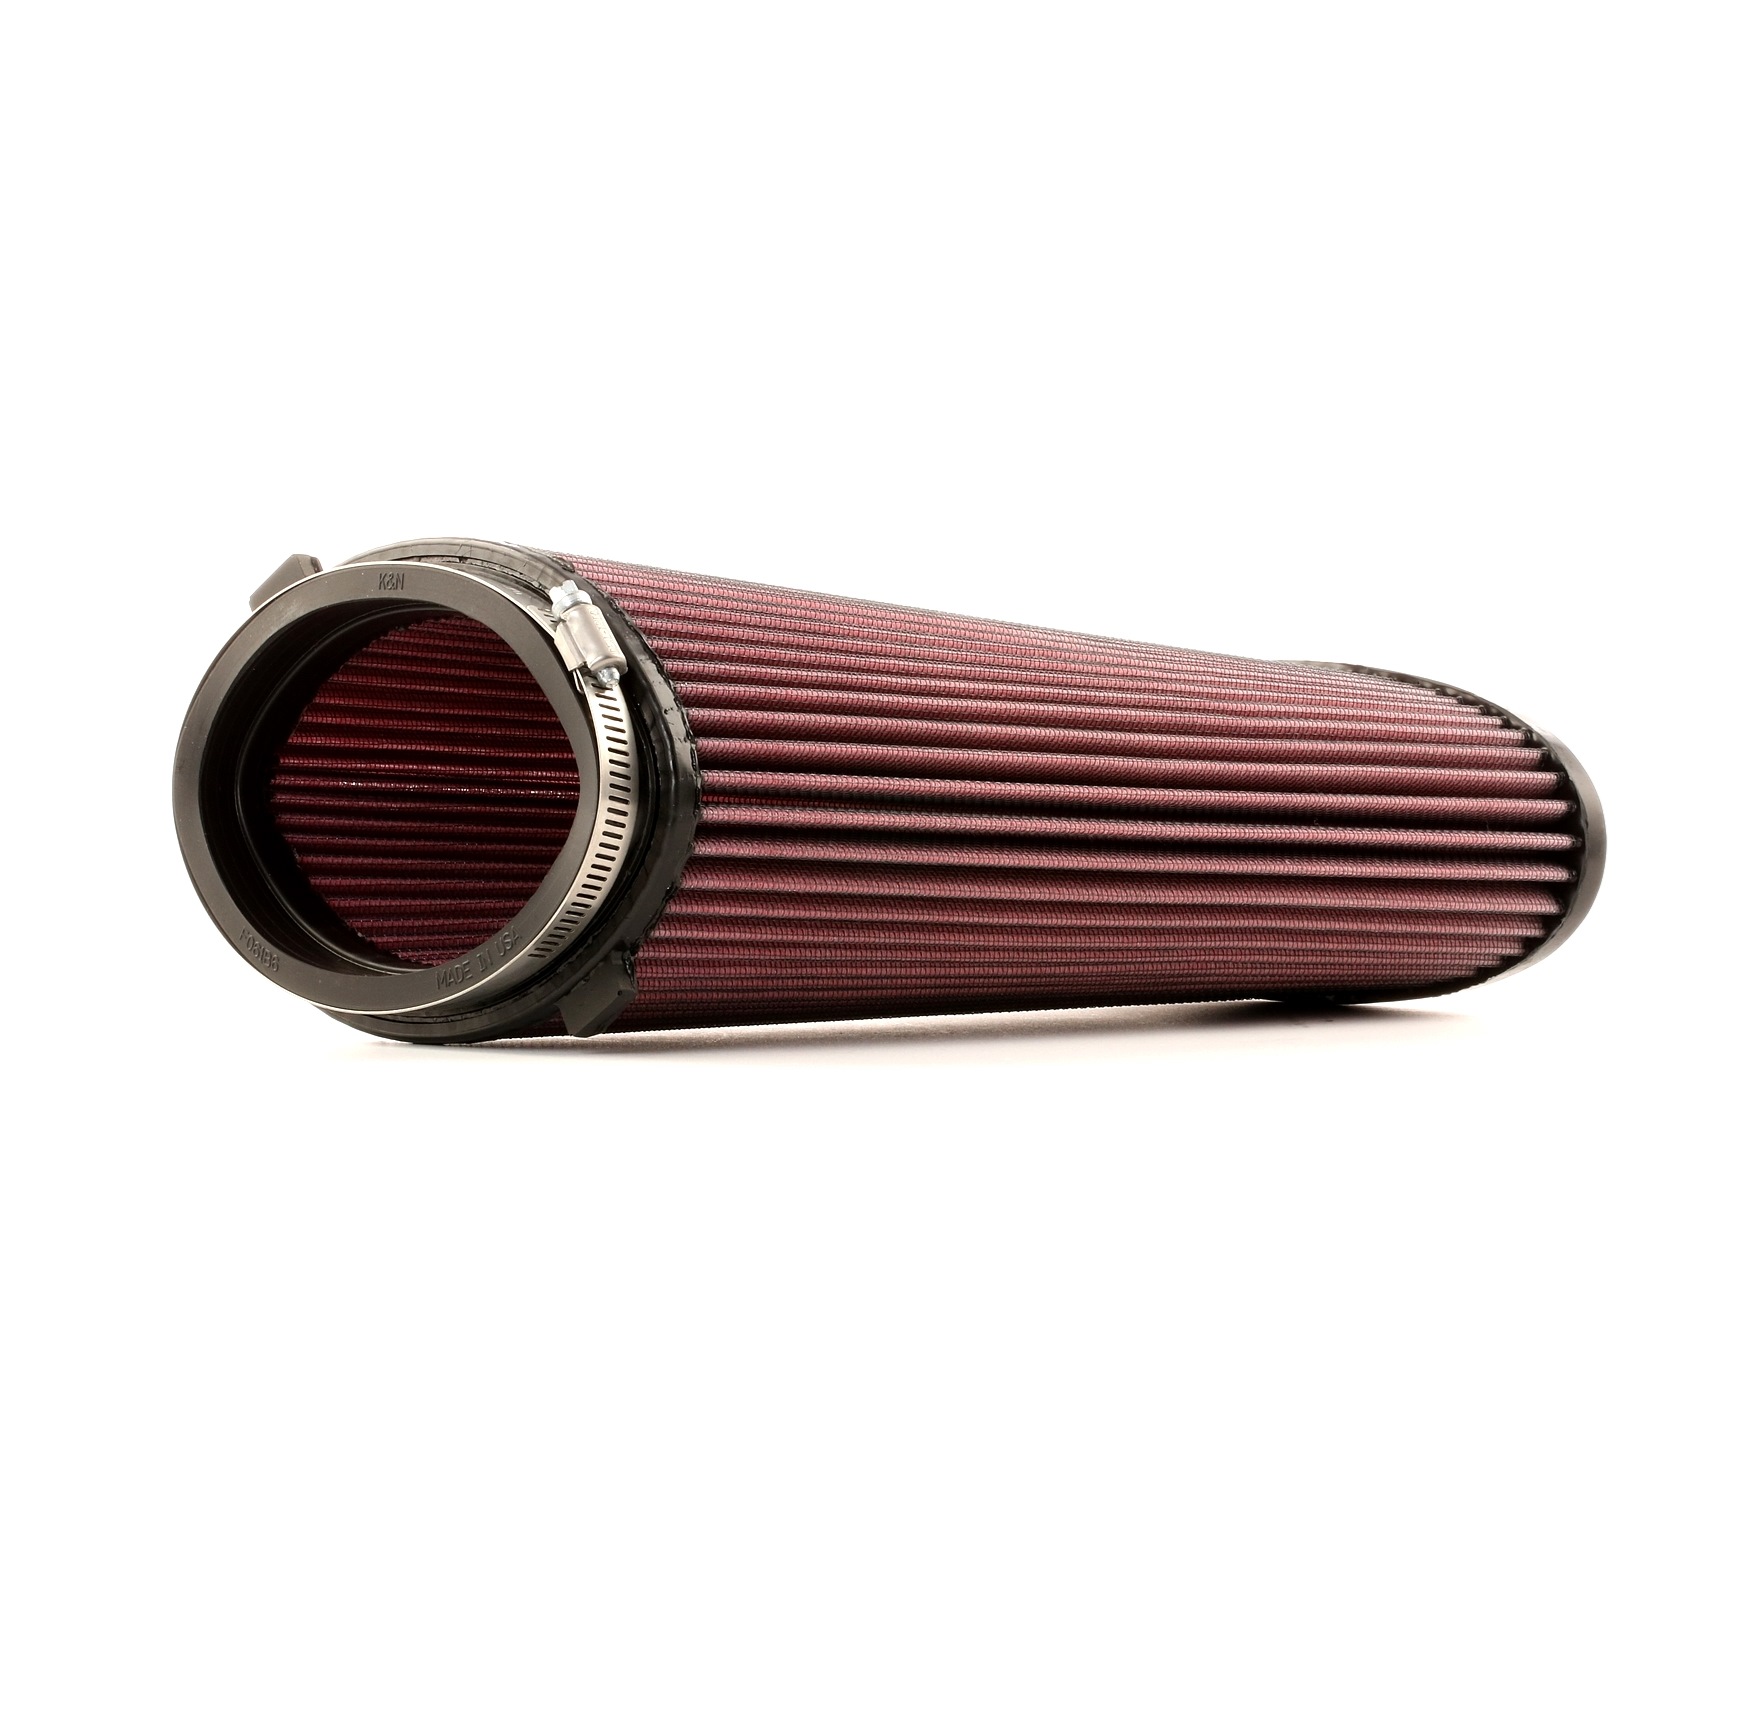 K&N Filters 294mm, 86mm, 79mm, round, Long-life Filter Length: 79mm, Width: 86mm, Height: 294mm Engine air filter E-2295 buy